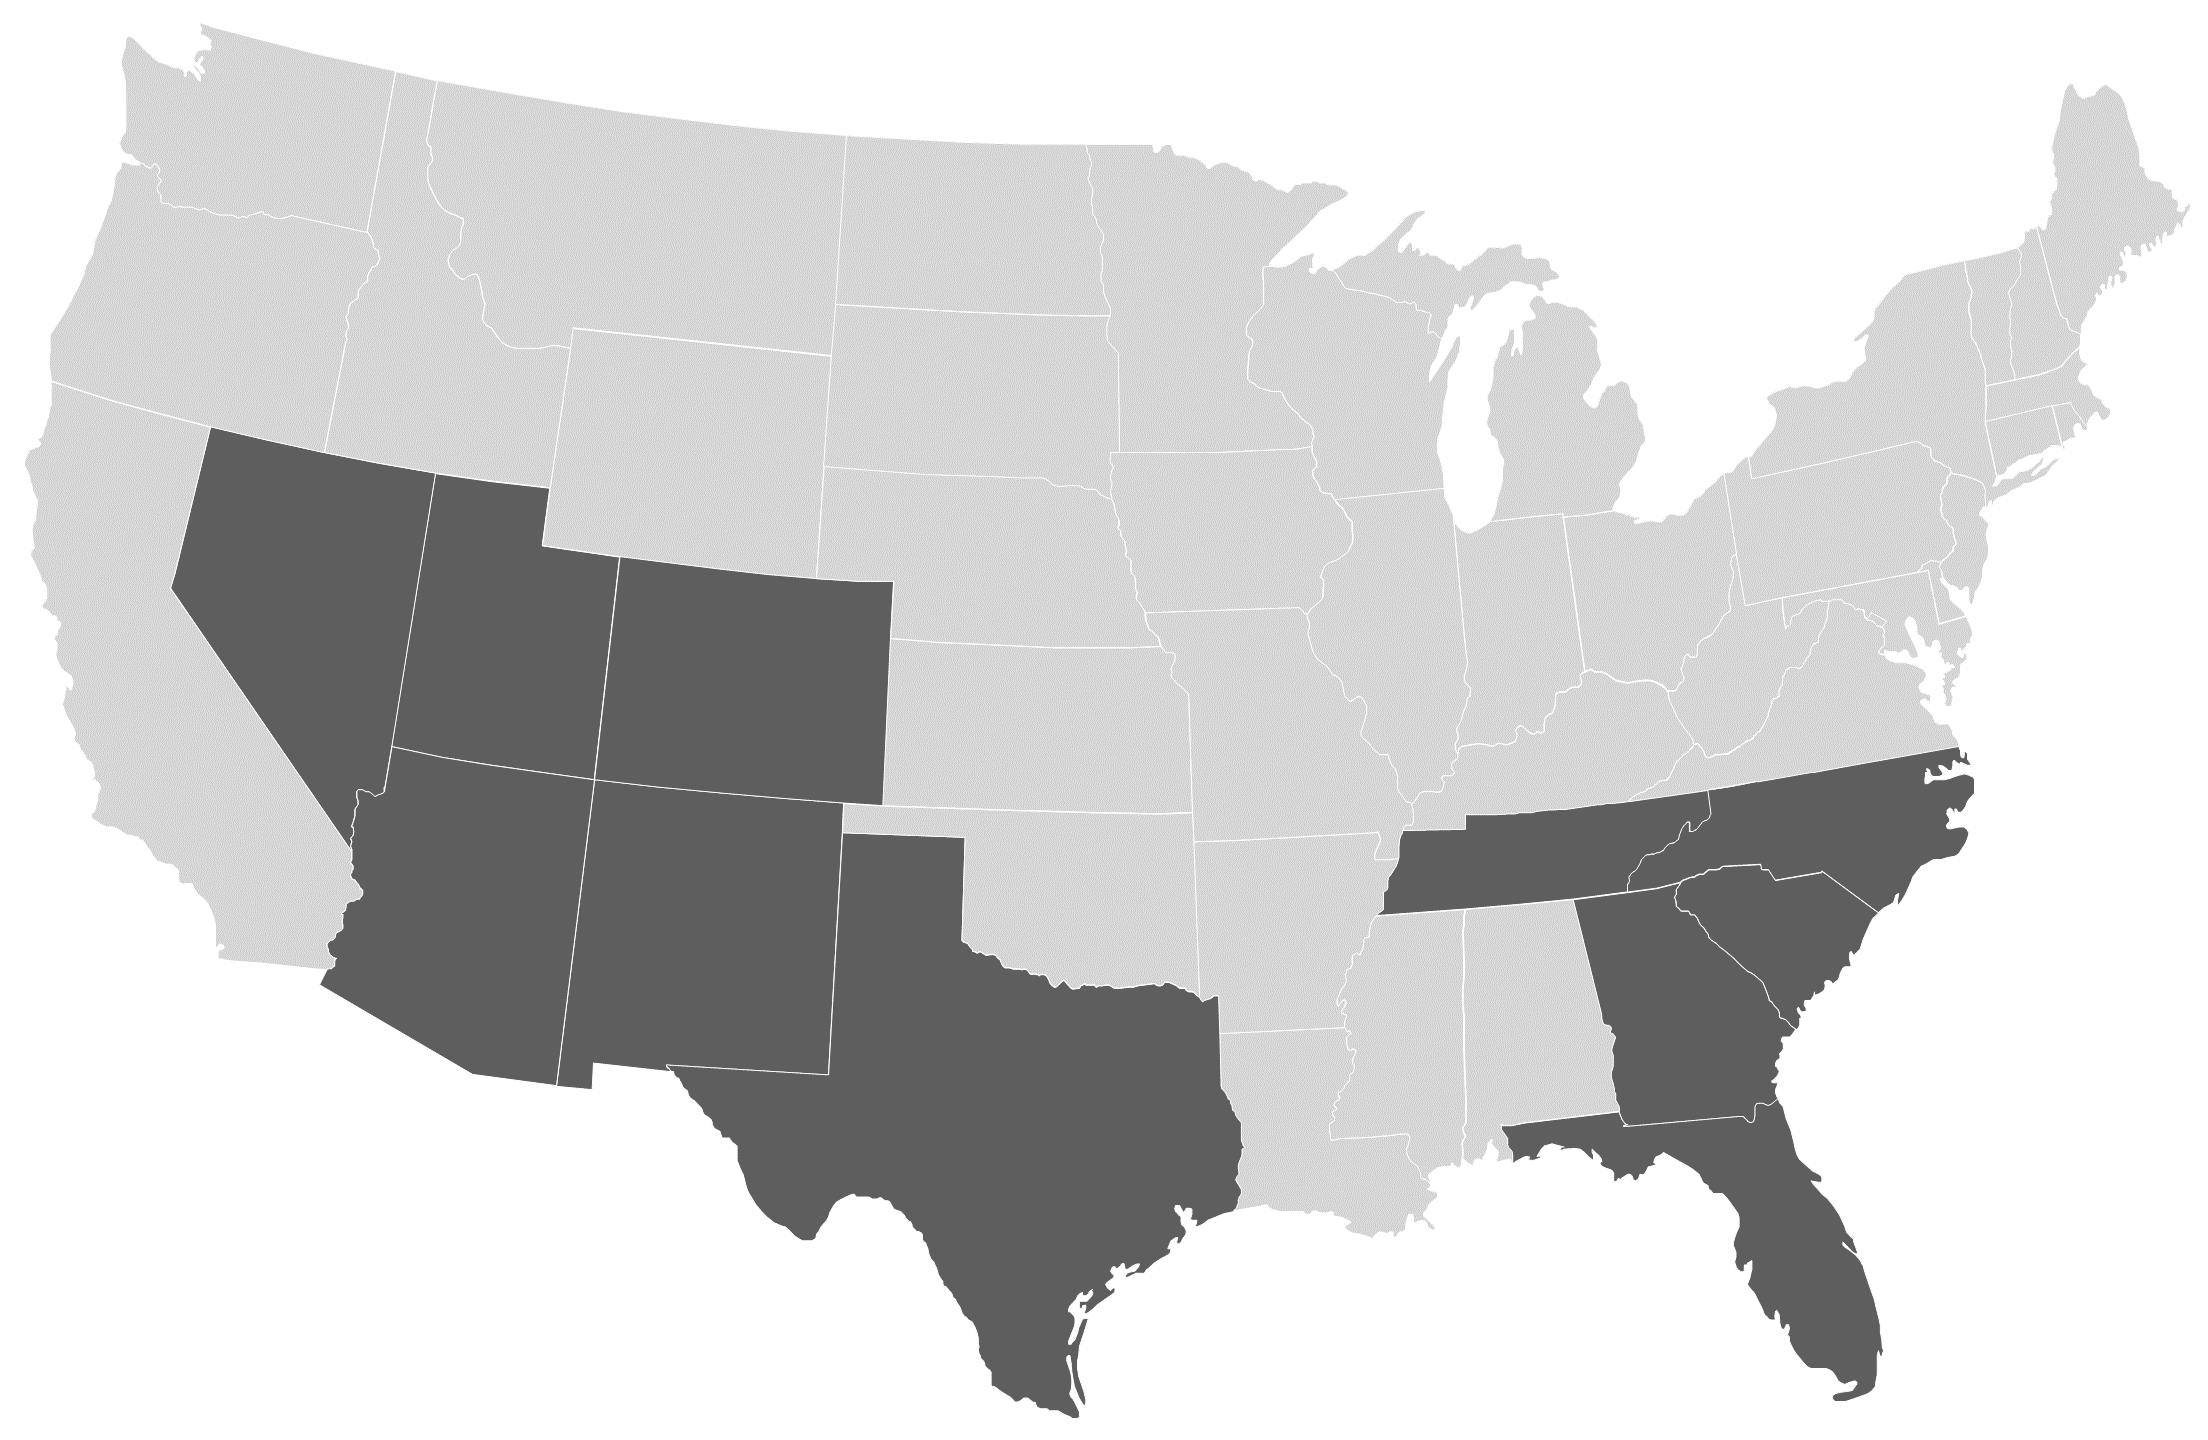 Map of U.S.A